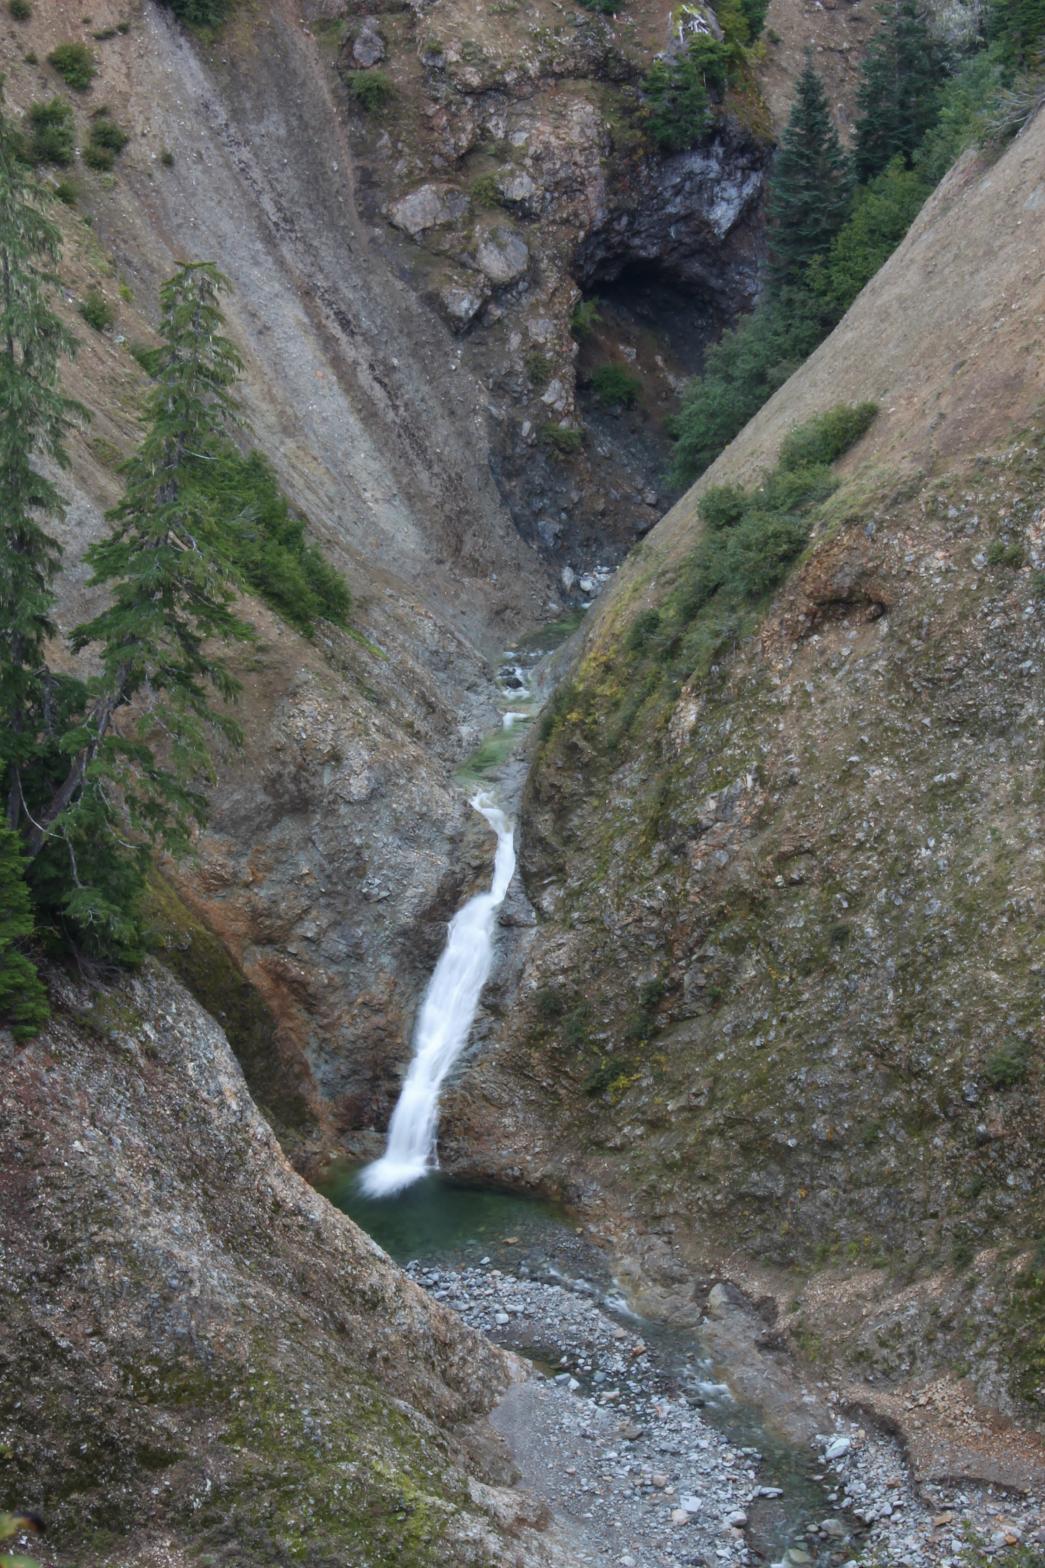 Lower Agathot Falls from atop the canyon